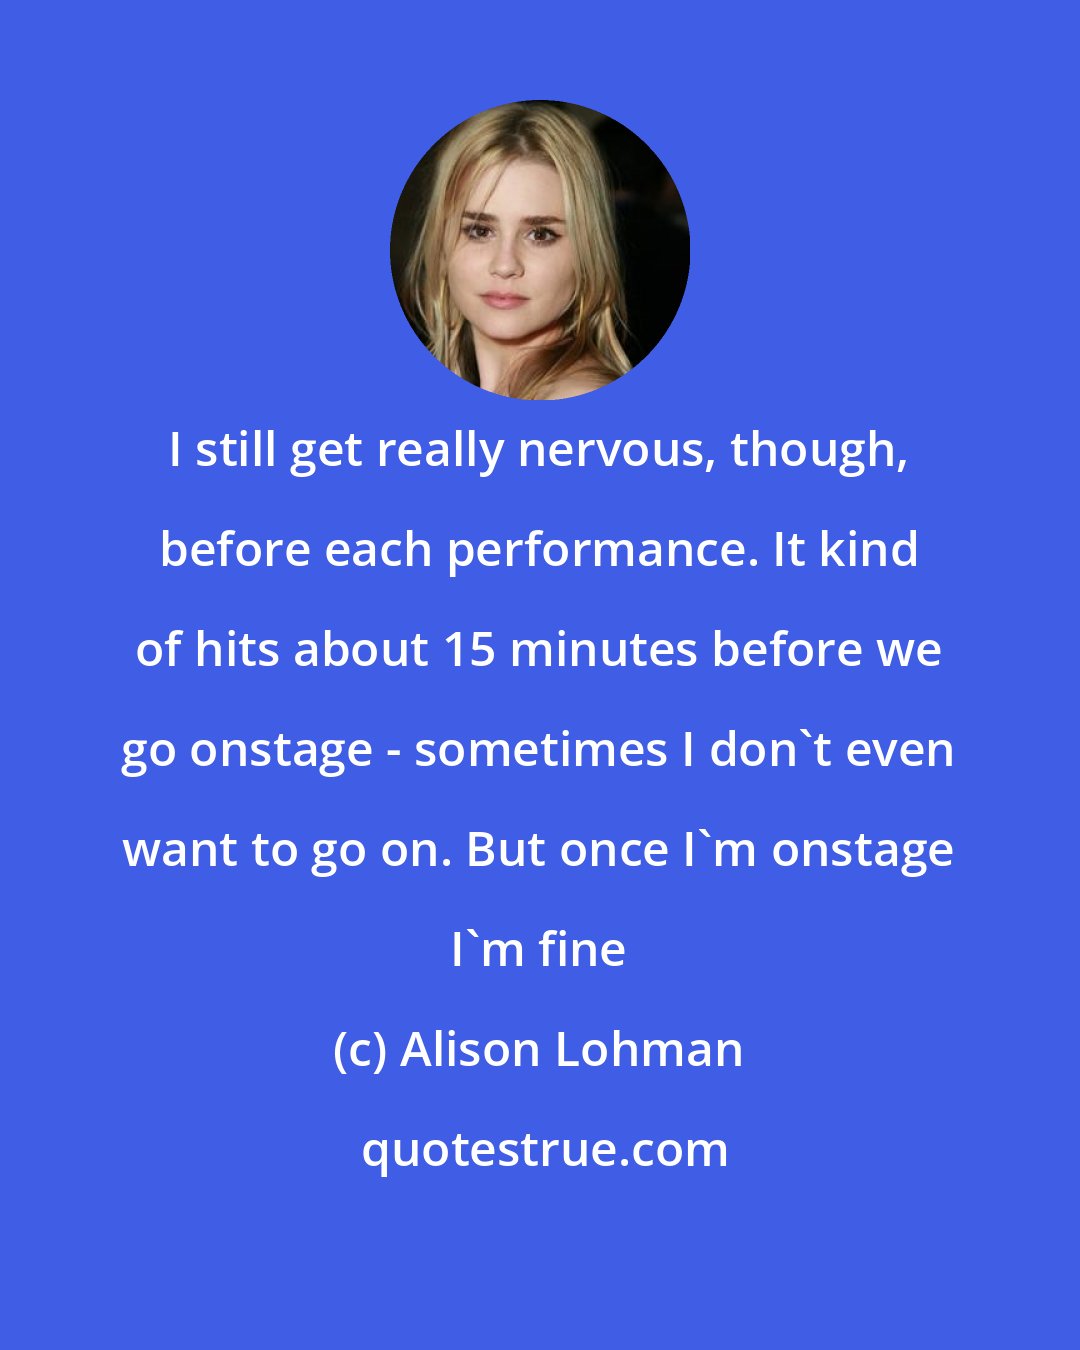 Alison Lohman: I still get really nervous, though, before each performance. It kind of hits about 15 minutes before we go onstage - sometimes I don't even want to go on. But once I'm onstage I'm fine